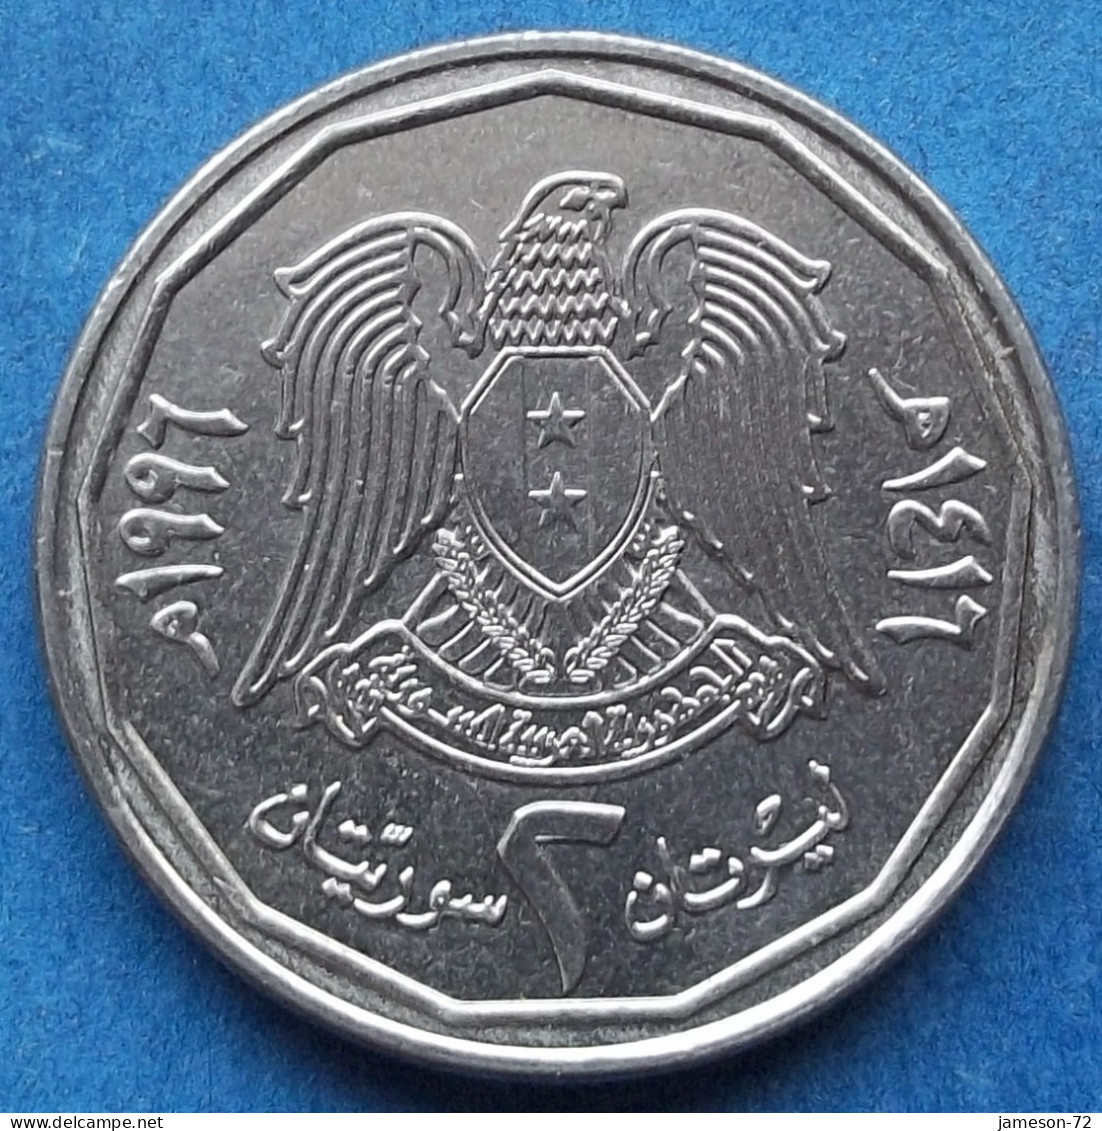 SYRIA - 2 Pounds AH1416 1996AD "Roman Theatre At Bosra" KM# 125 Syrian Arab Republic (1961) - Edelweiss Coins - Syrie